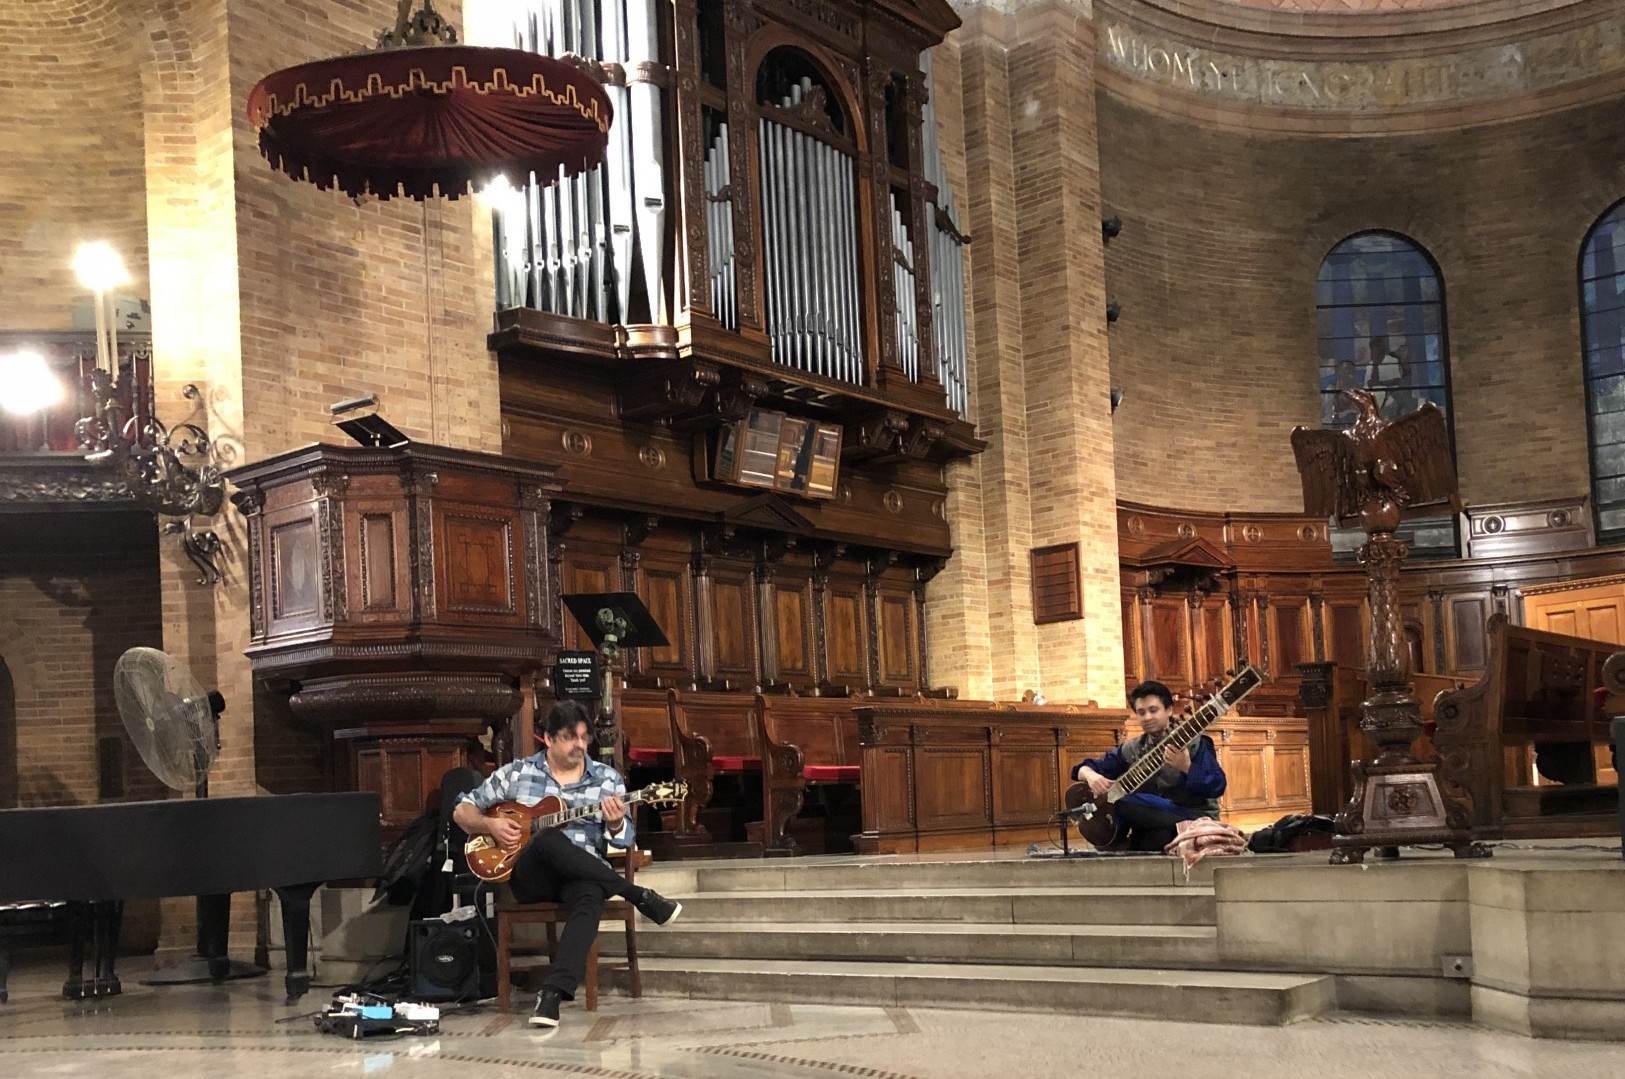 Sacred music event at St. Paul's with a sitar and guitar player. 